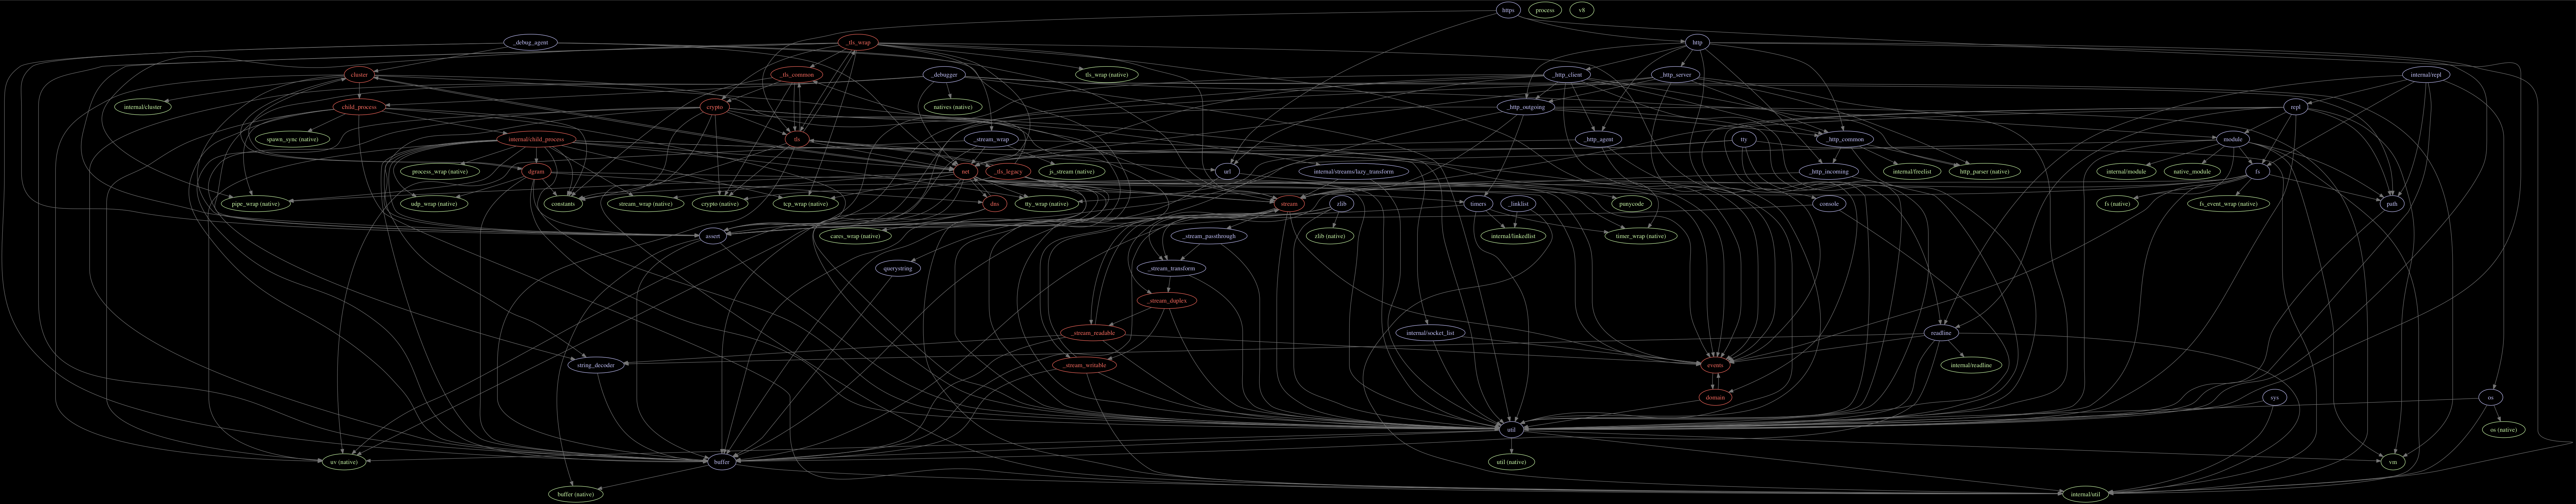 node modules dependency graph (including native)